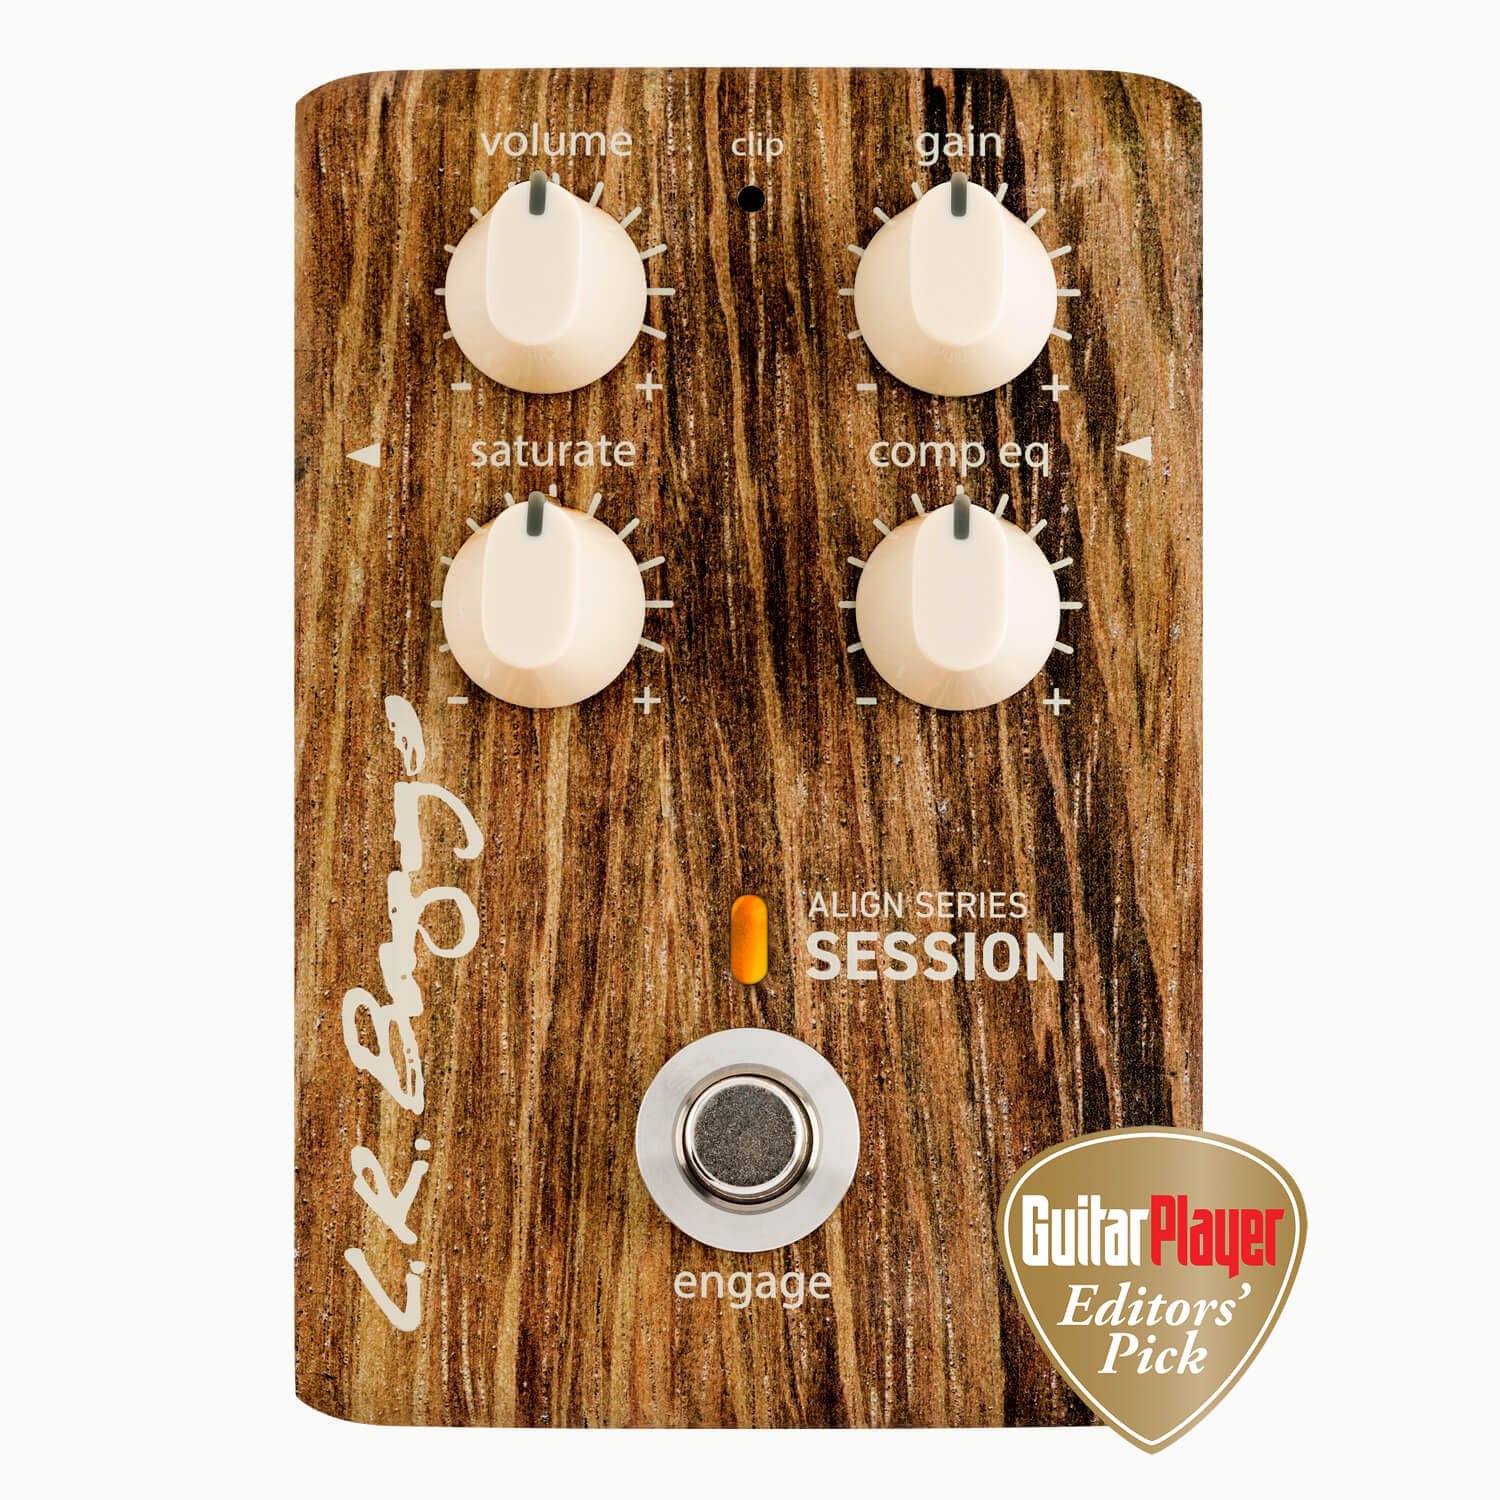 Align Series Session Acoustic Guitar Pedal